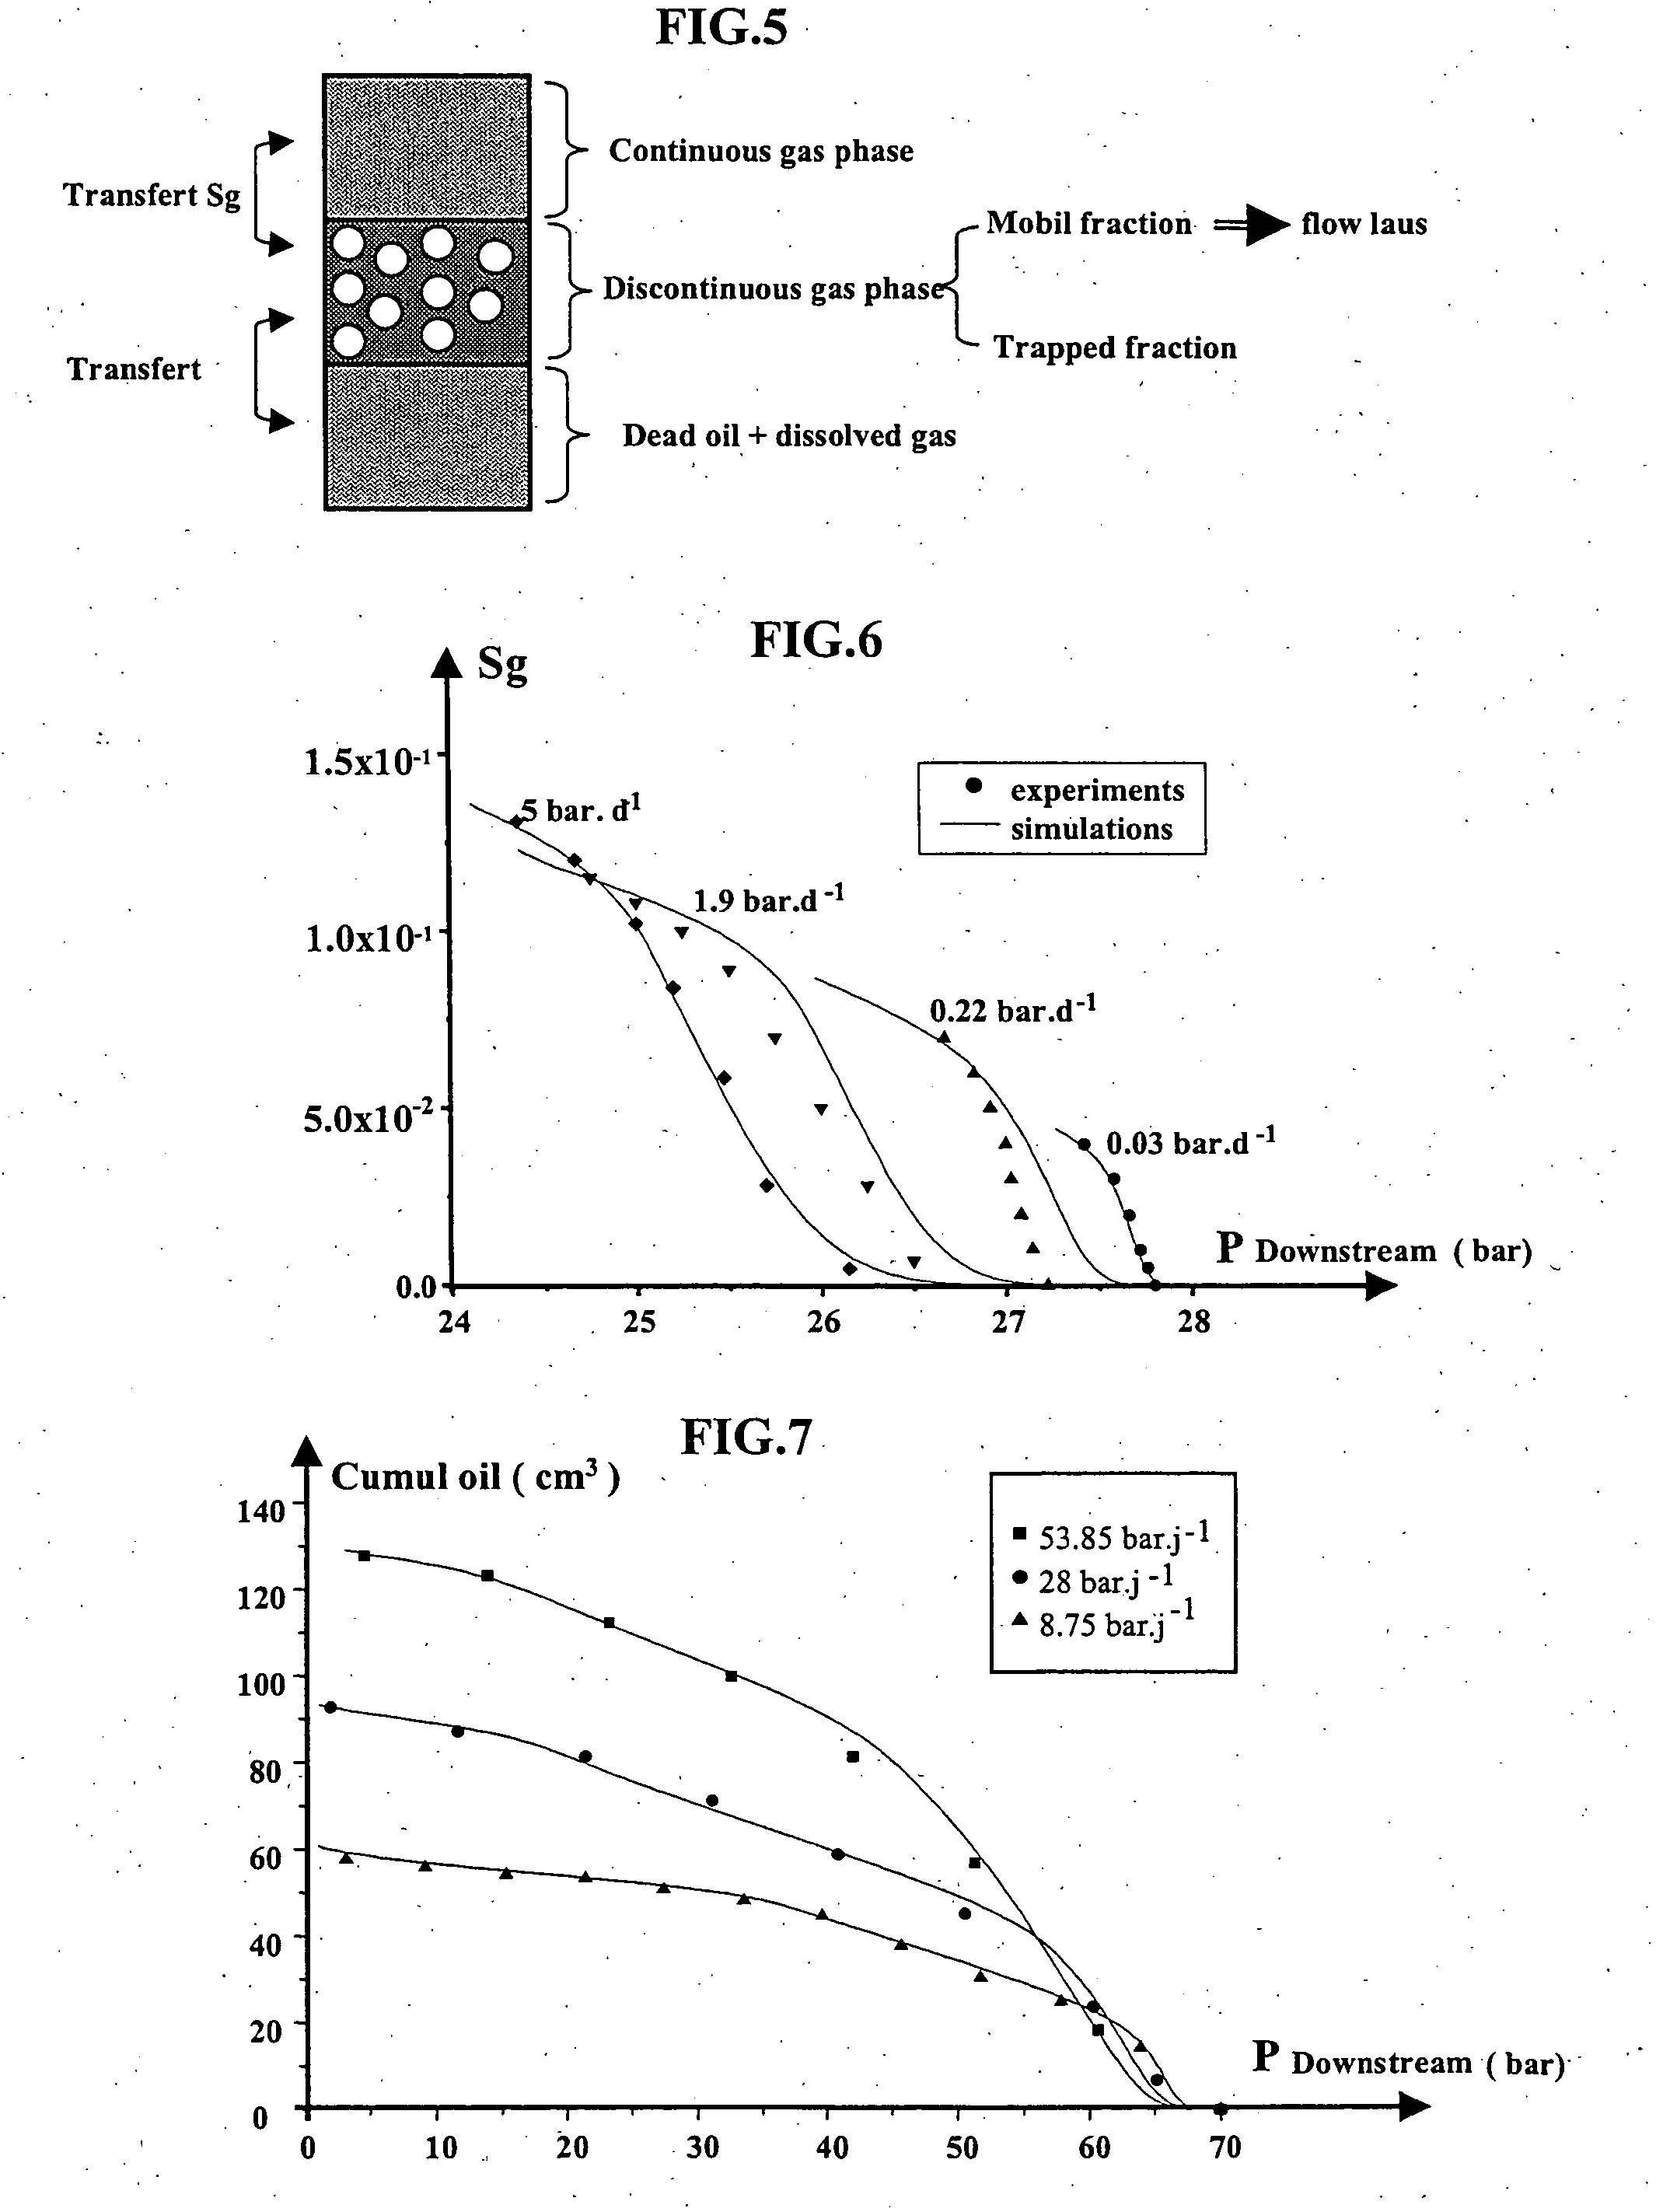 Method for modelling the production of hydrocarbons by a subsurface deposit which are subject to depletion